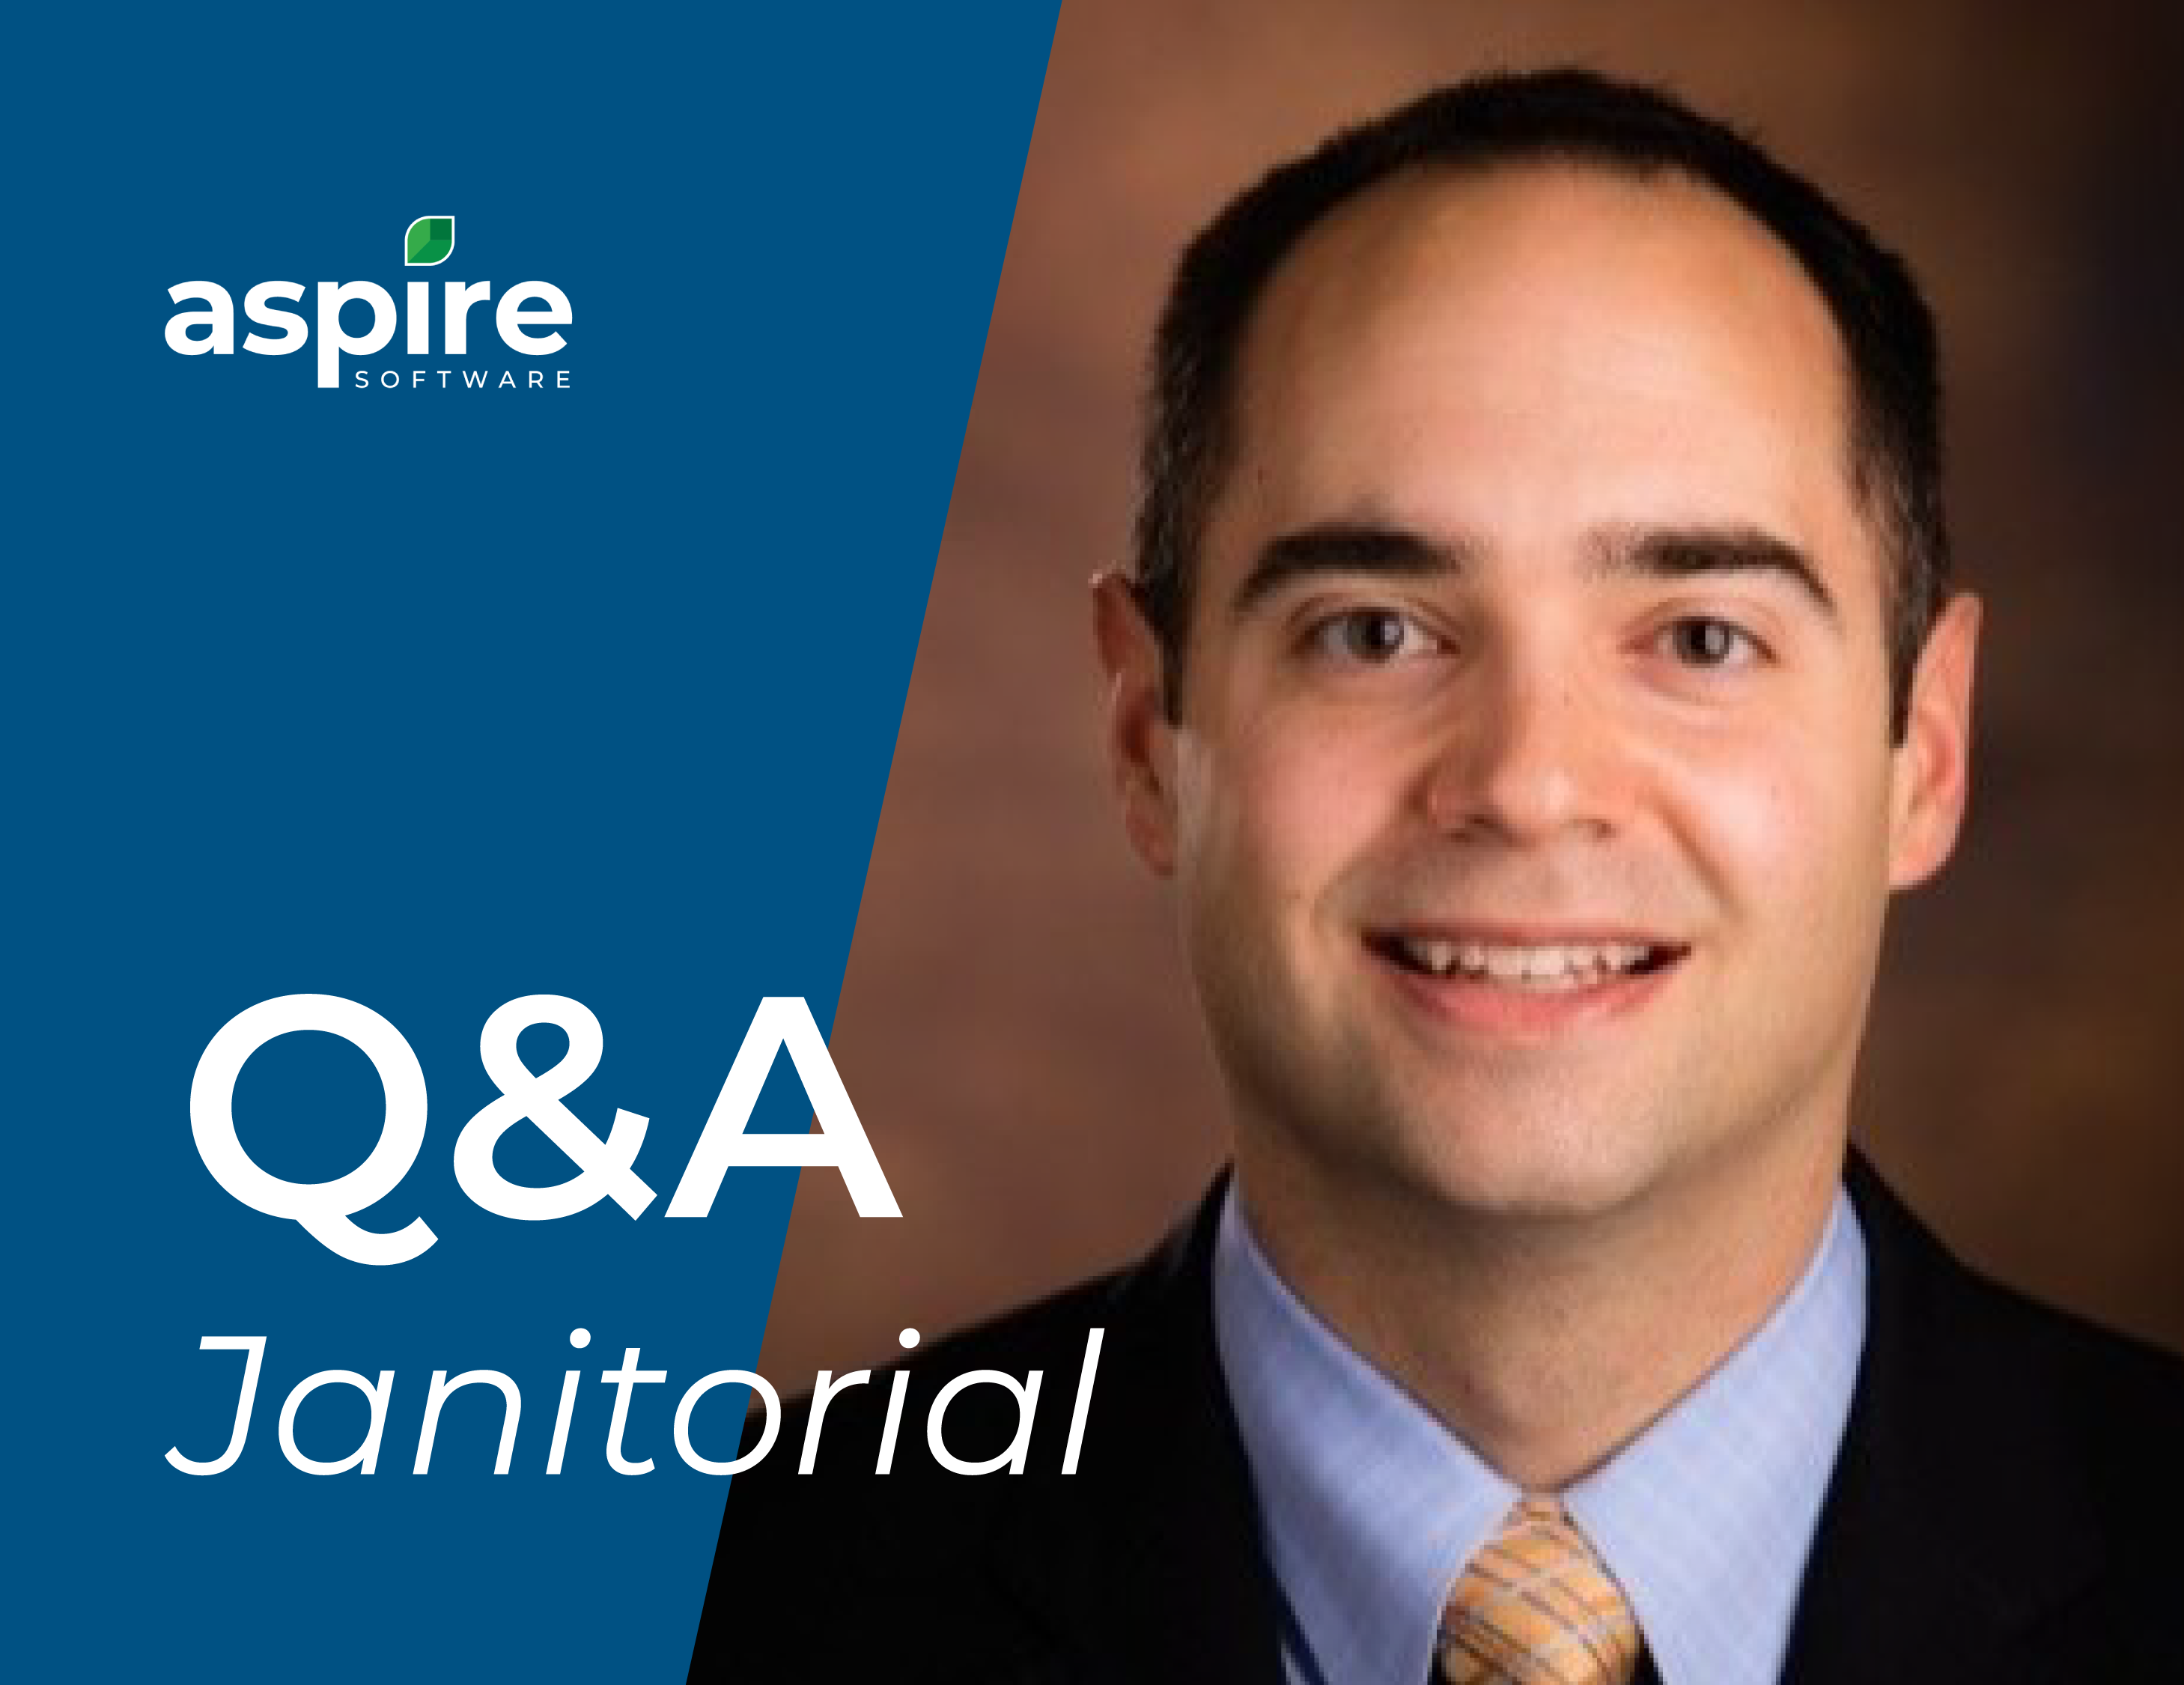 Aspire Janitorial Q&A with product manager Jason Pyne